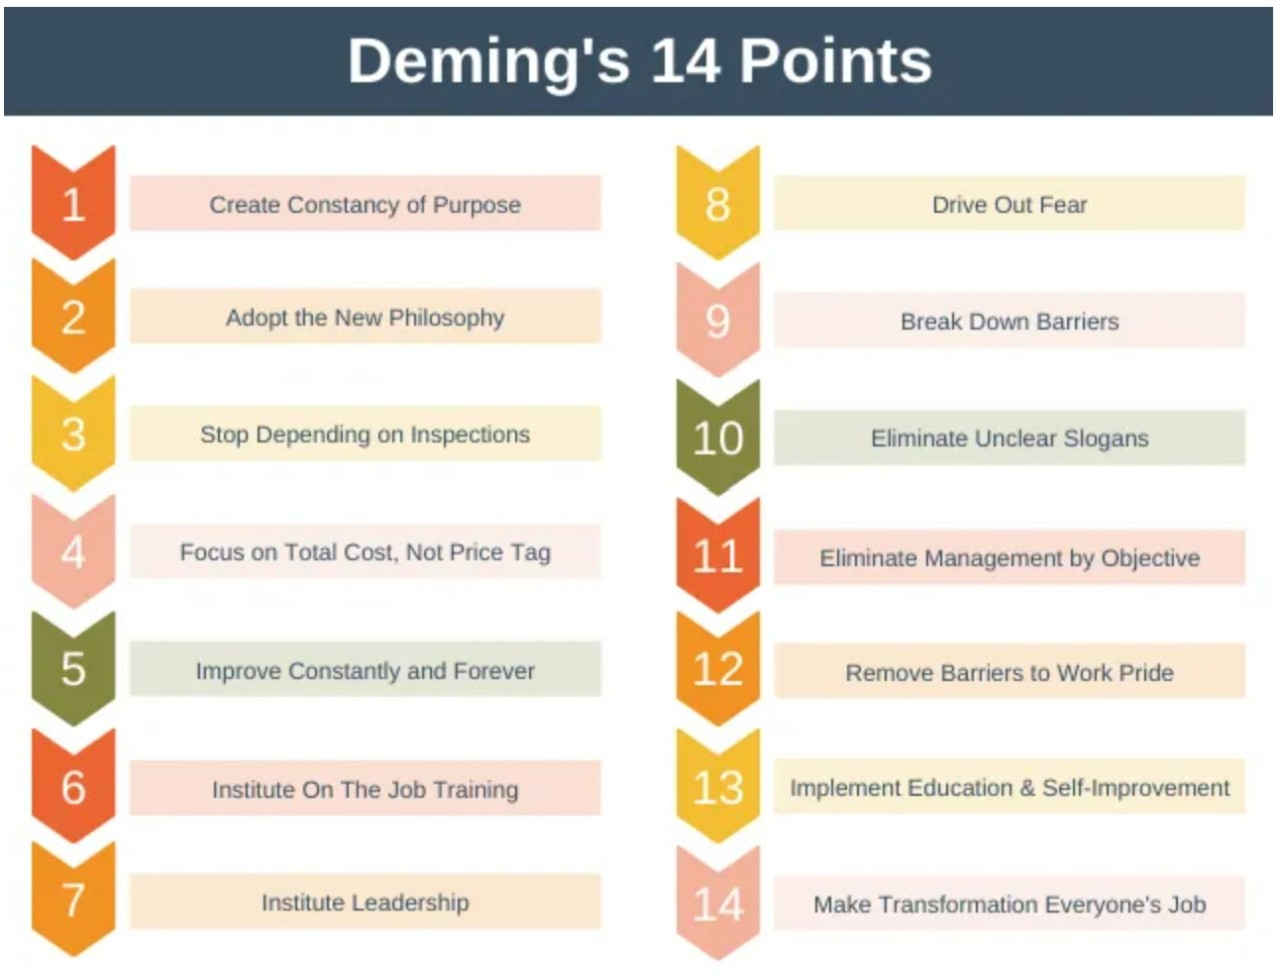 Toyota Deming 14 Points